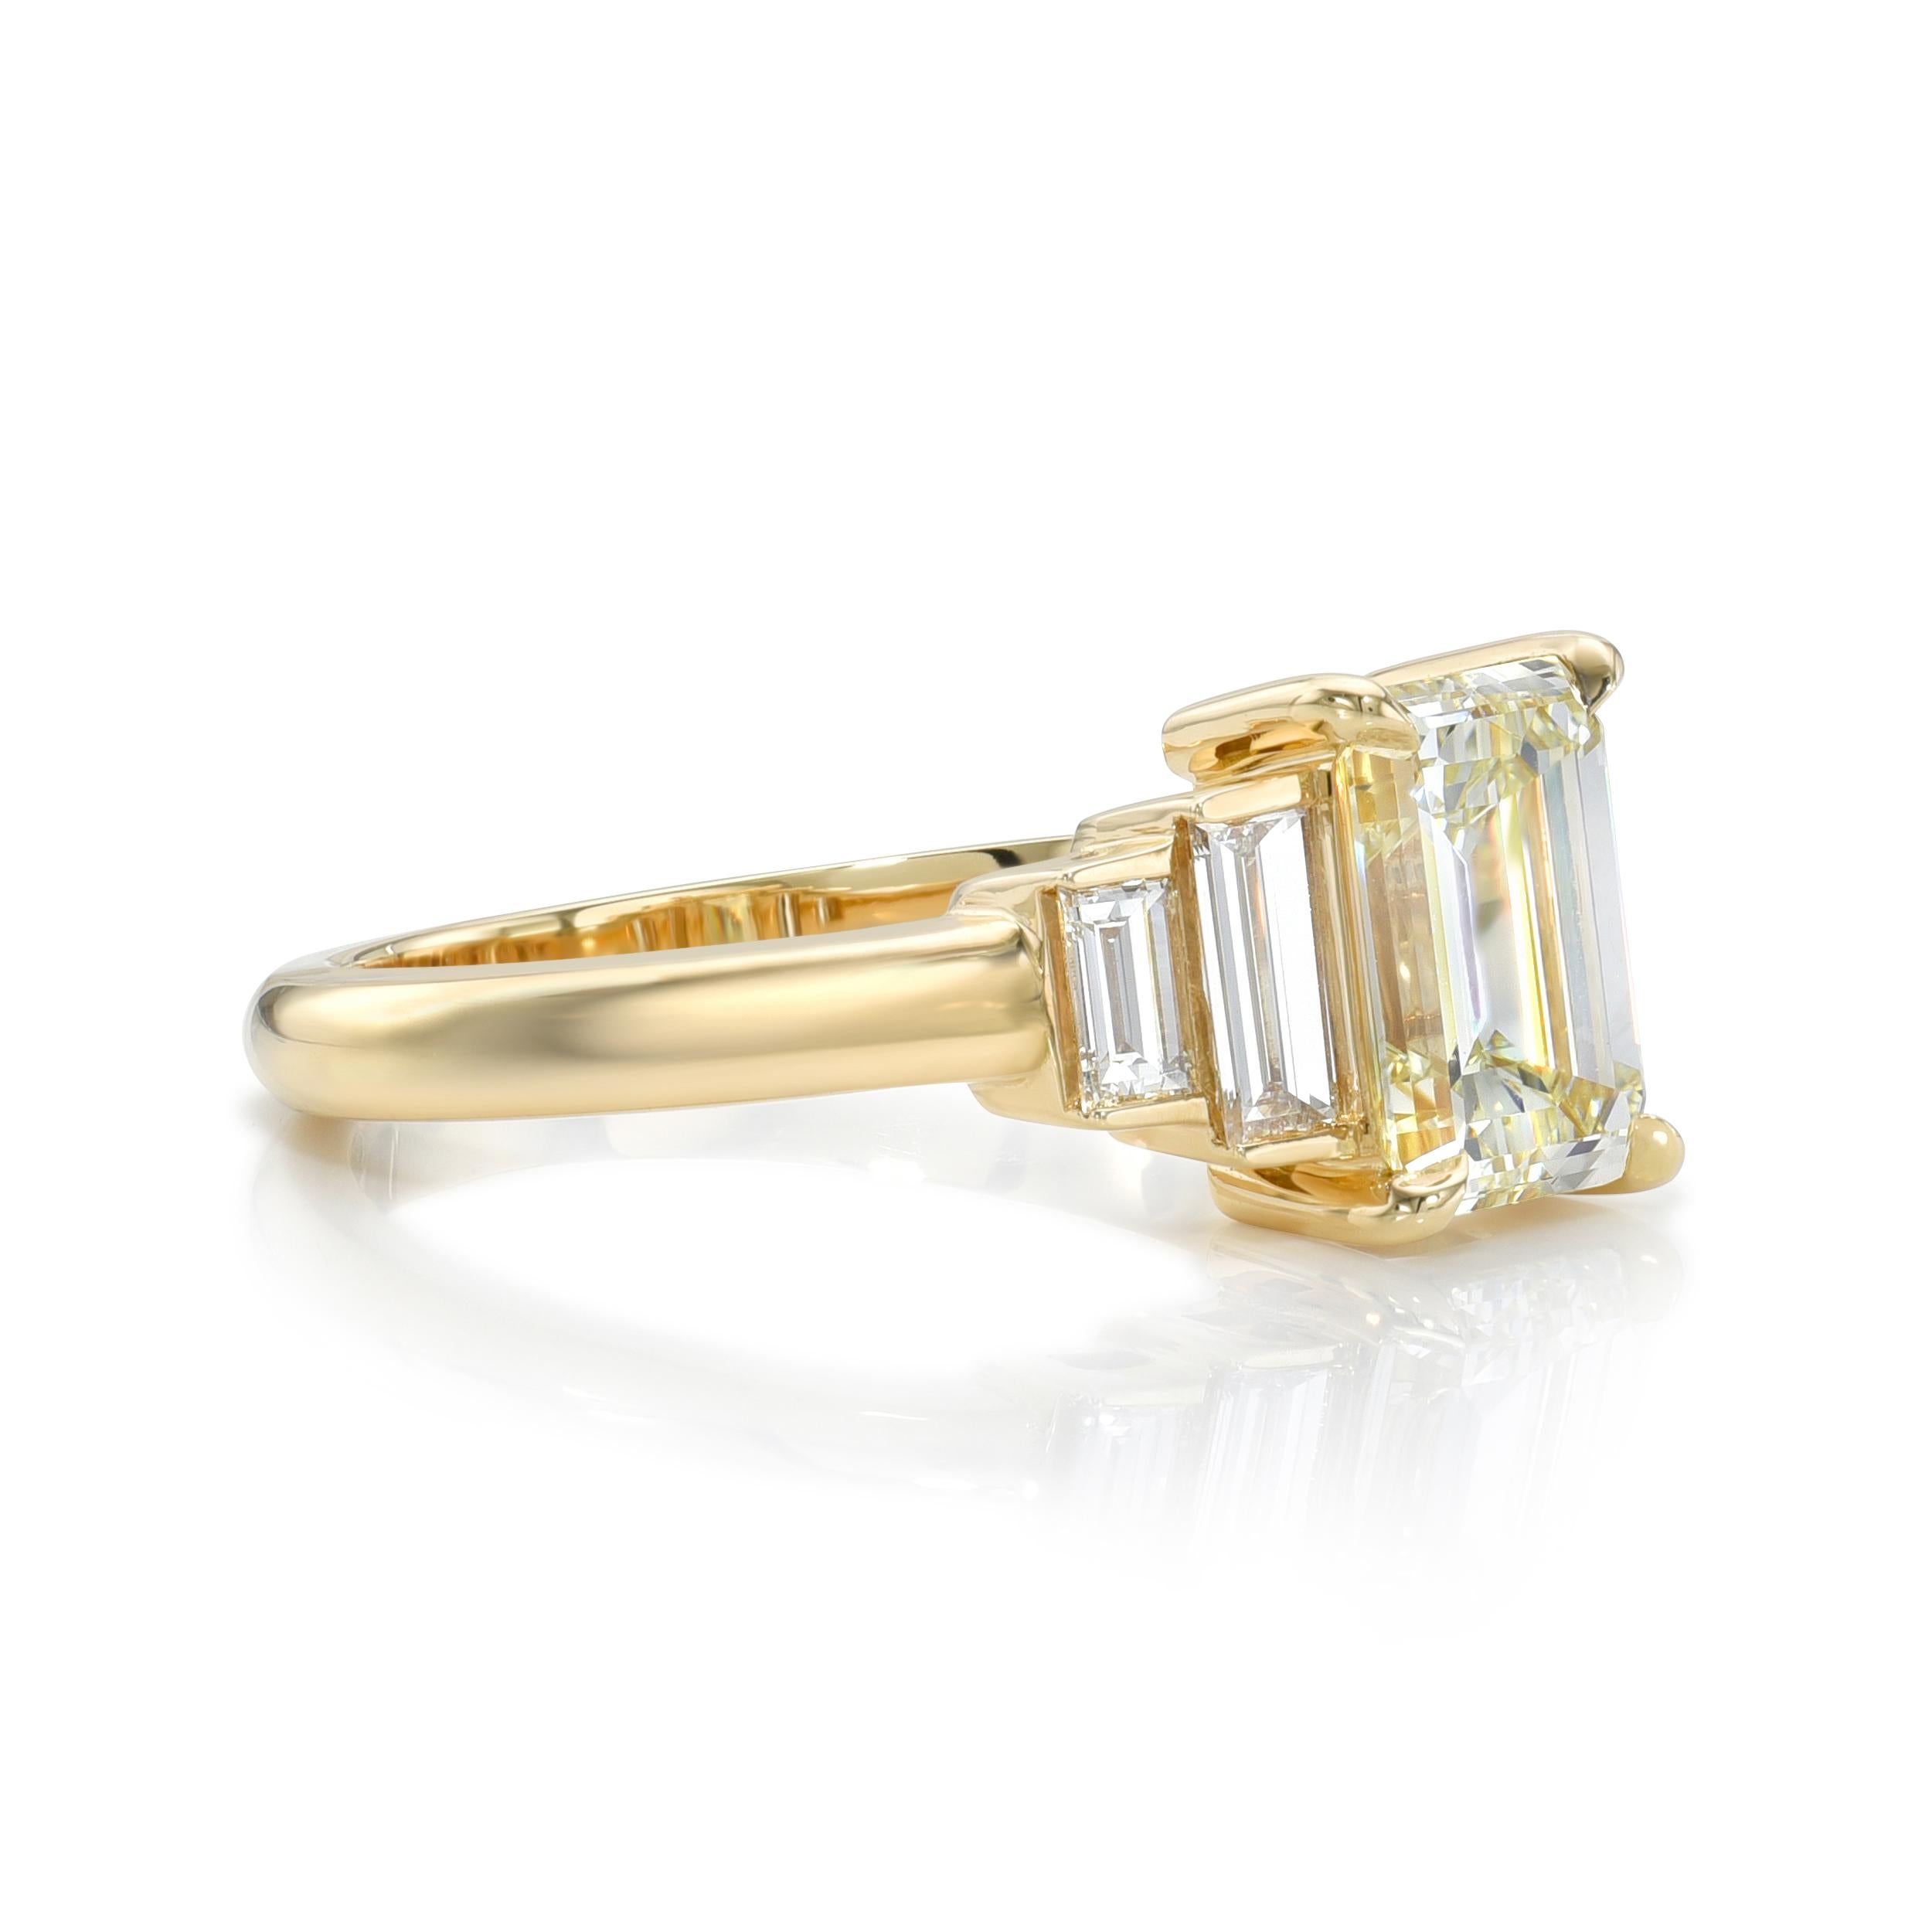 1.51ct N/VS2 GIA certified emerald cut diamond with 0.41ctw baguette cut accent diamonds prong set in a handcrafted 18K yellow gold mounting.